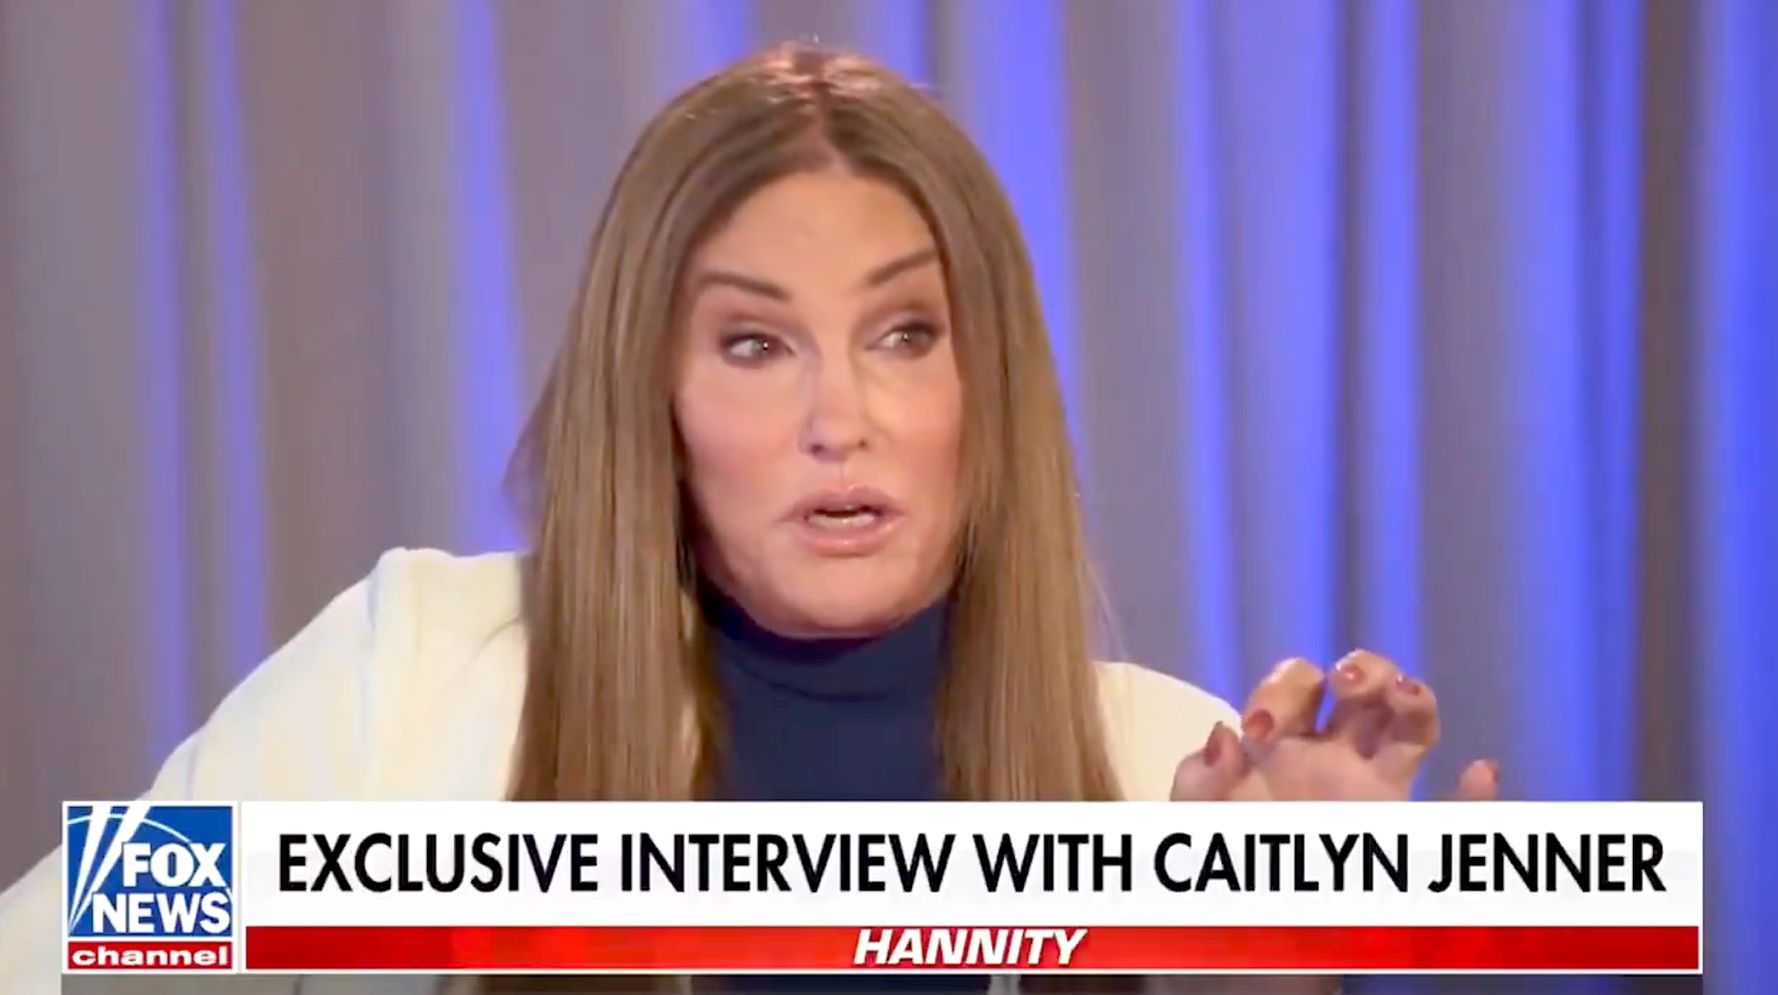 Caitlyn Jenner, California Gubernatorial Candidate, Says She's 'All For' Trump's Wall